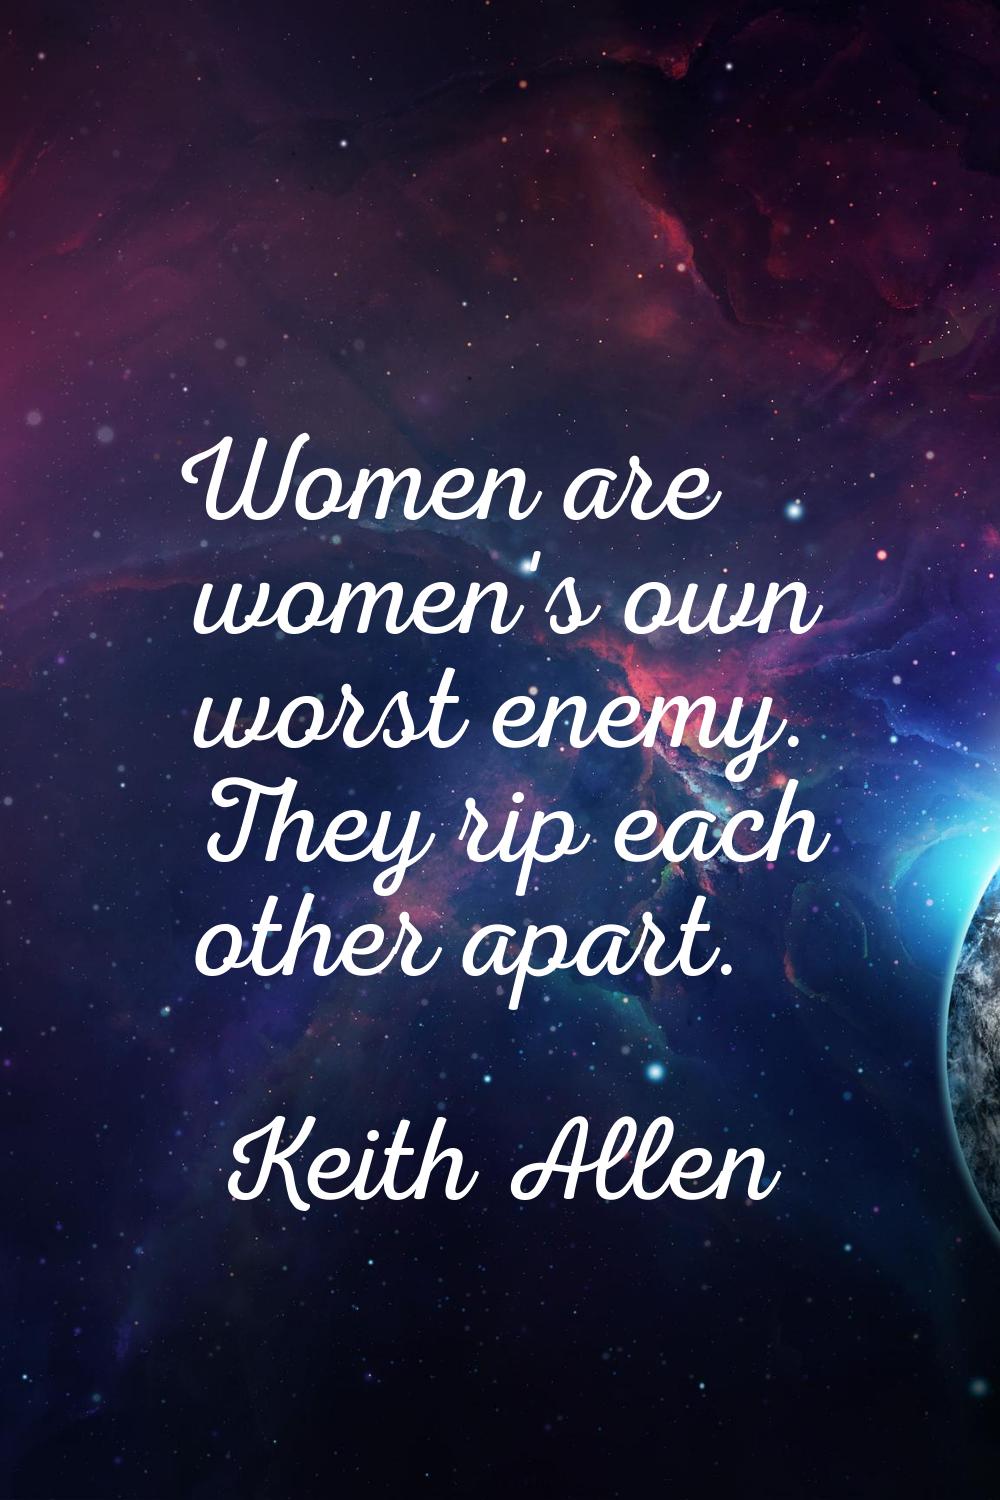 Women are women's own worst enemy. They rip each other apart.